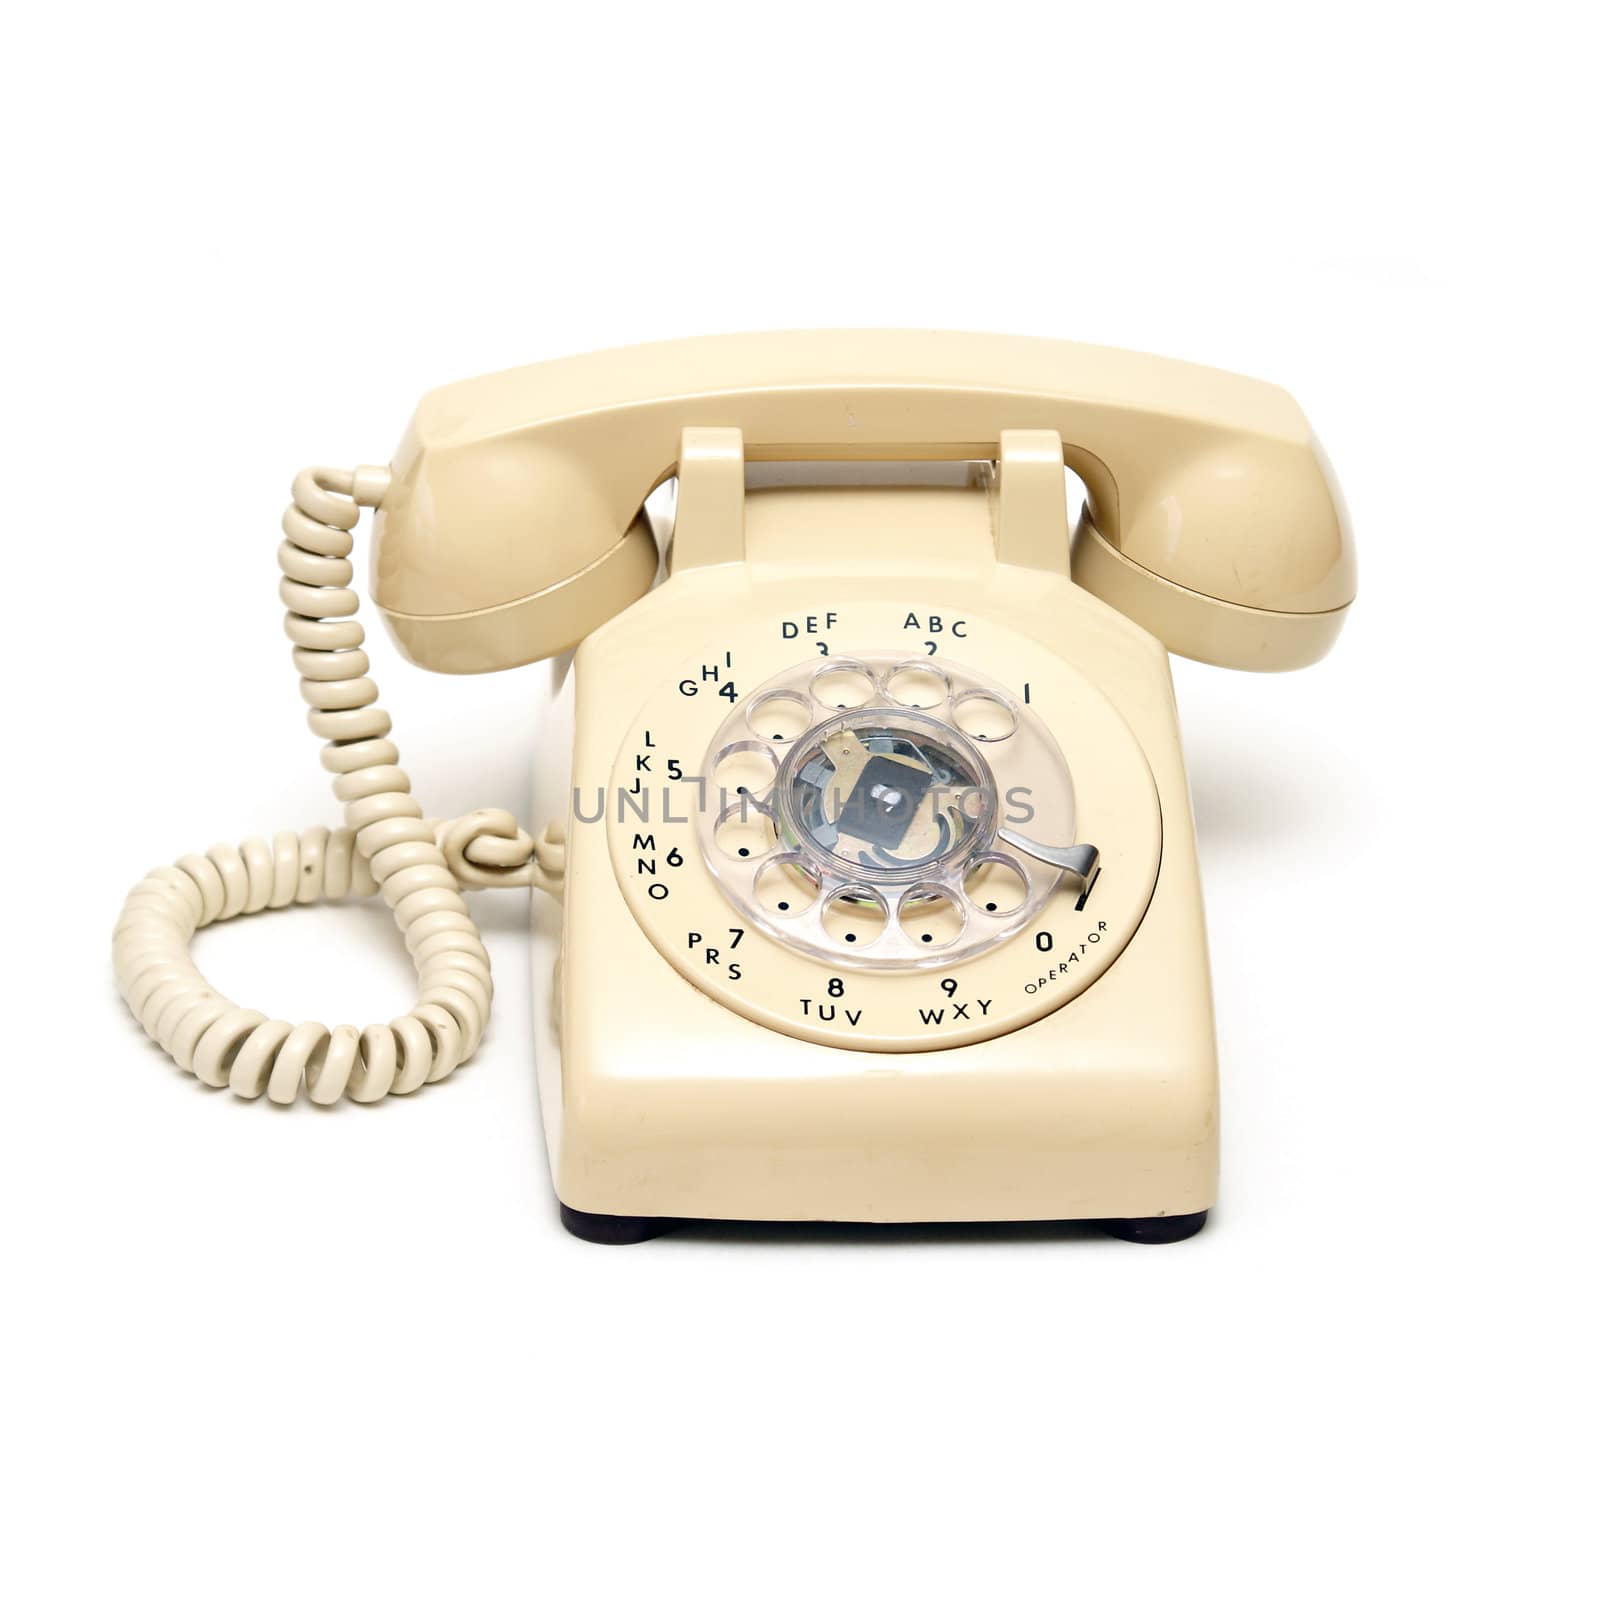 An isolated shot of a traditional rotary phone.